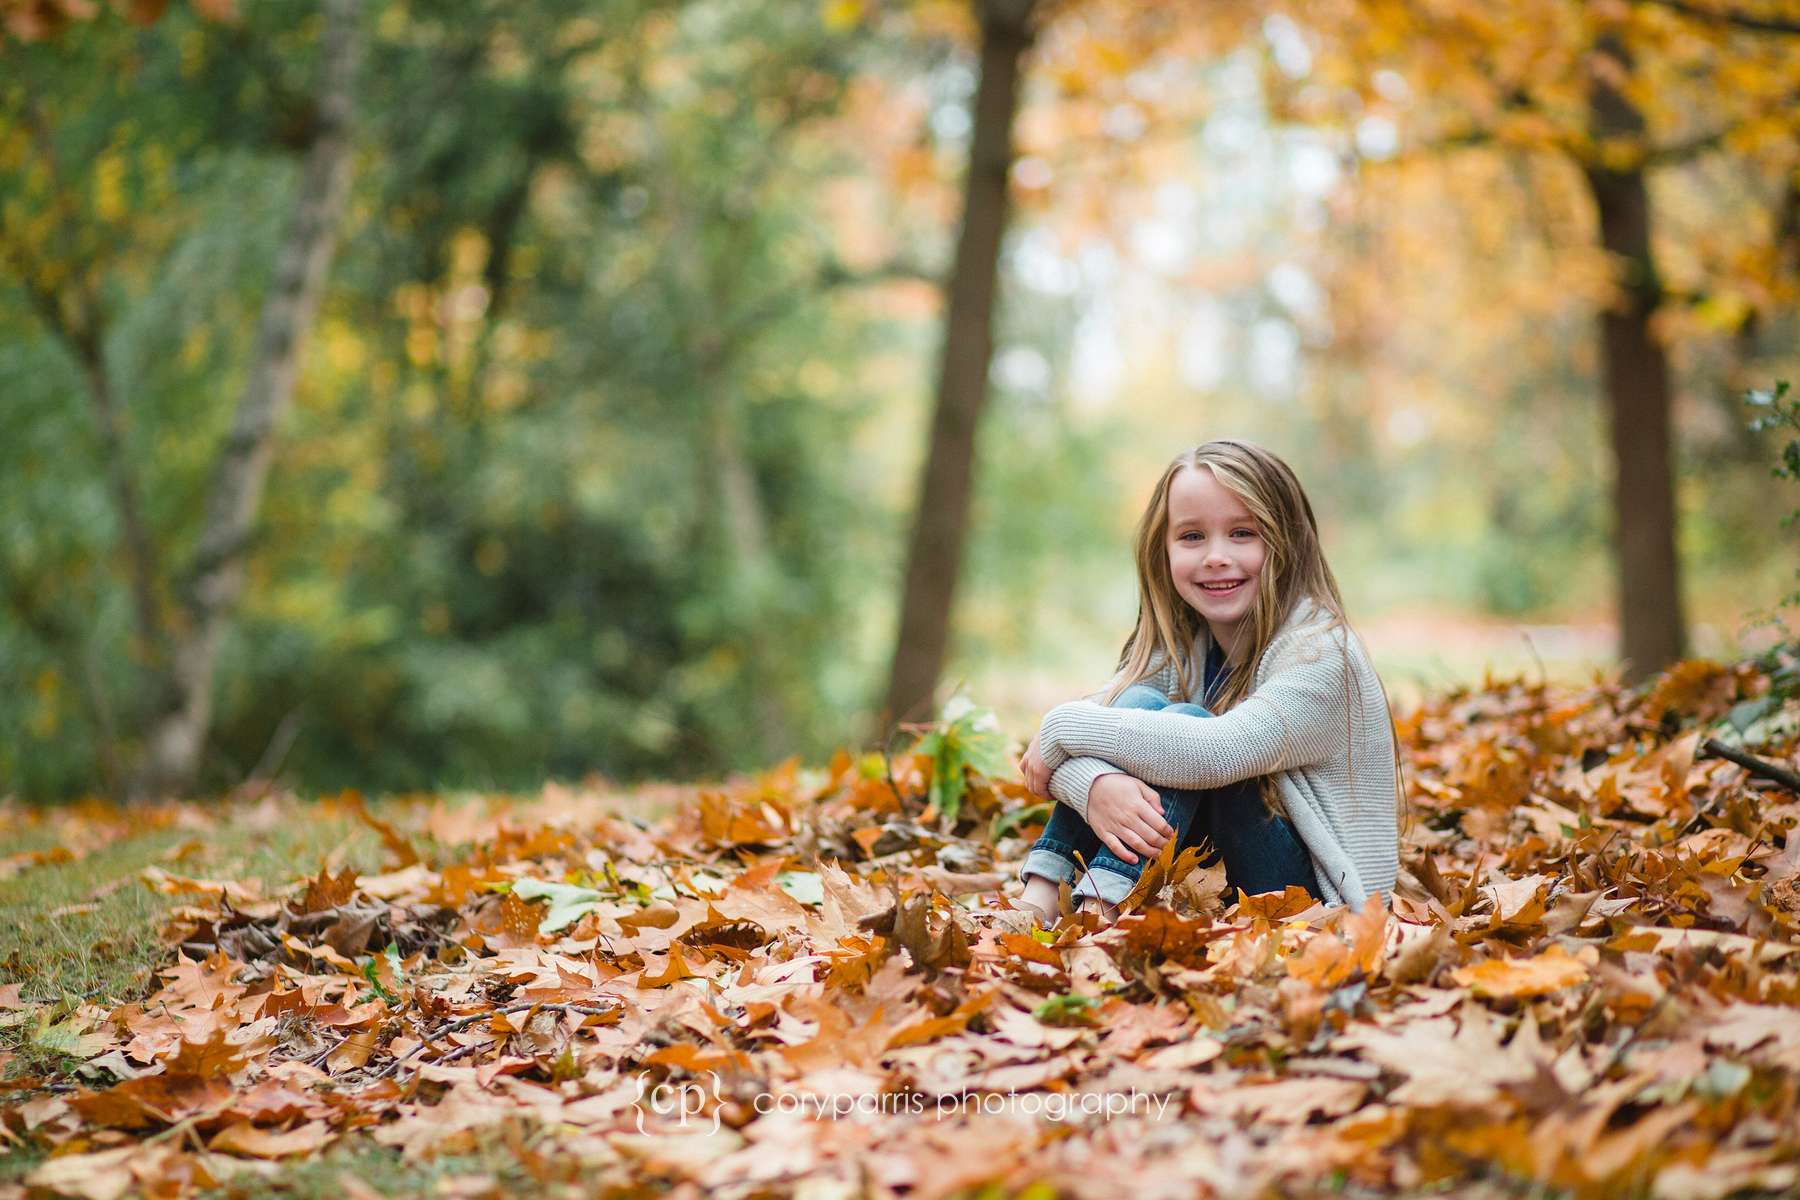 Girl in fall leaves Seattle portrait photographer